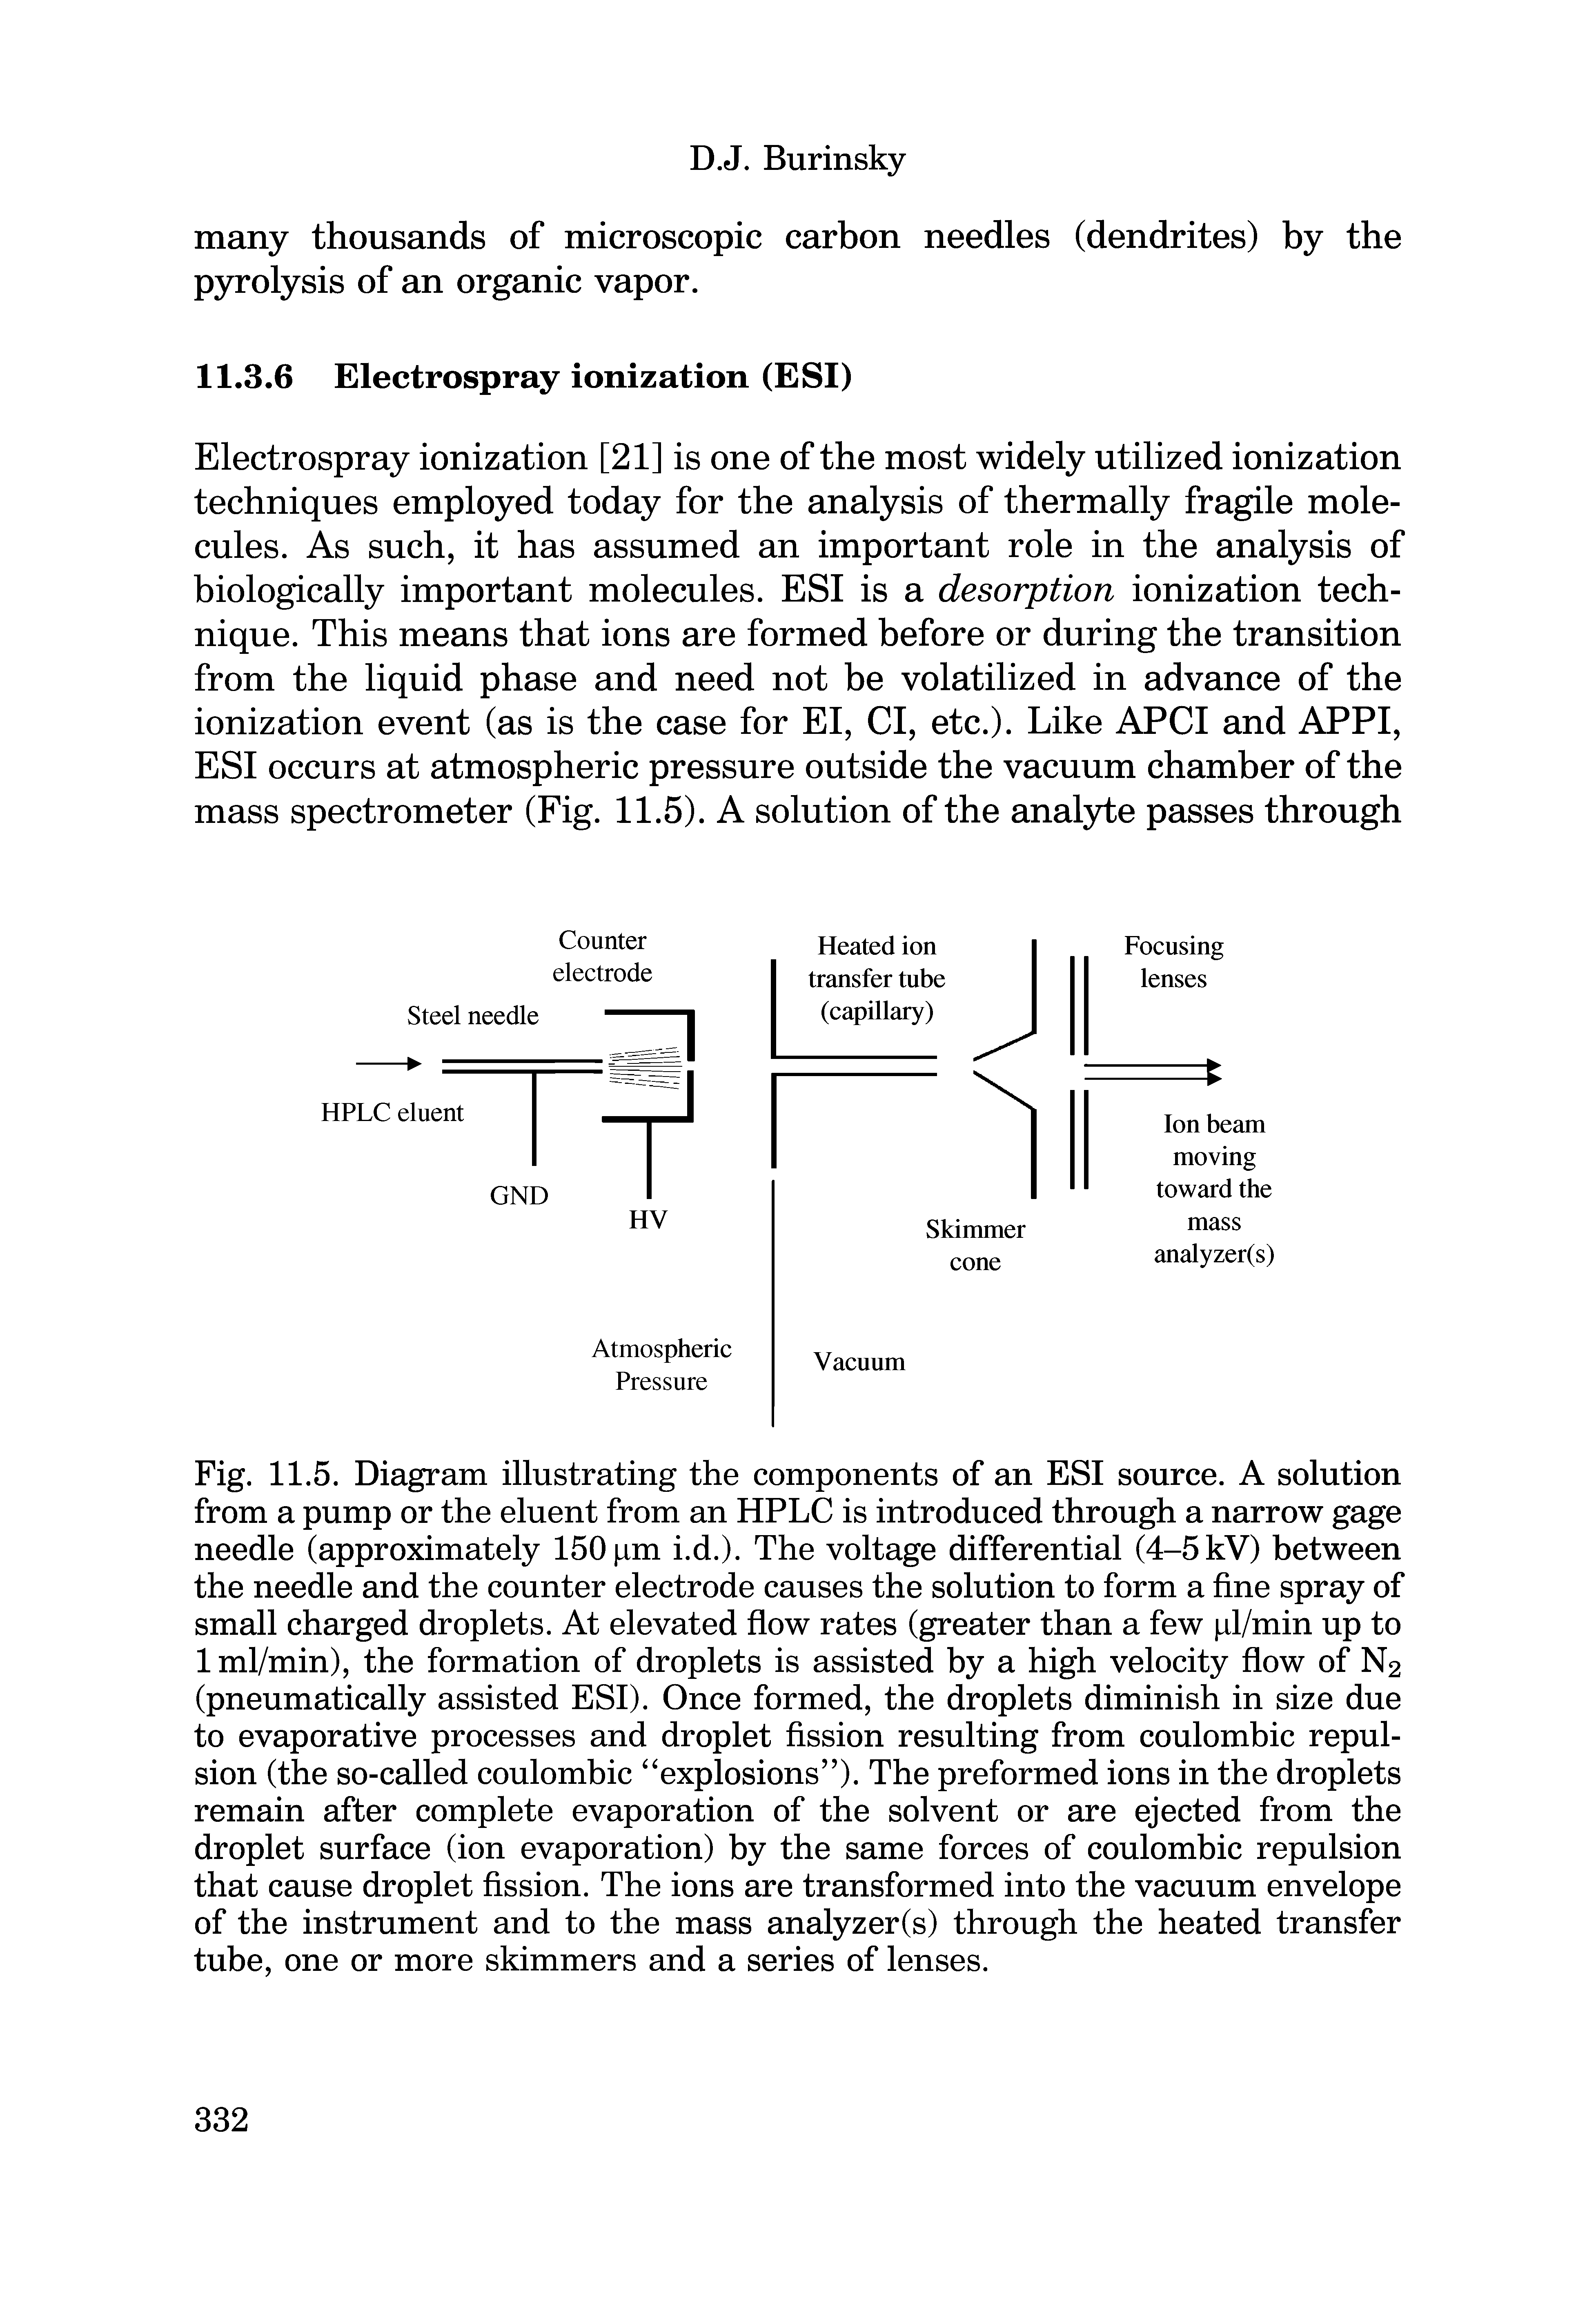 Fig. 11.5. Diagram illustrating the components of an ESI source. A solution from a pump or the eluent from an HPLC is introduced through a narrow gage needle (approximately 150 pm i.d.). The voltage differential (4-5 kV) between the needle and the counter electrode causes the solution to form a fine spray of small charged droplets. At elevated flow rates (greater than a few pl/min up to 1 ml/min), the formation of droplets is assisted by a high velocity flow of N2 (pneumatically assisted ESI). Once formed, the droplets diminish in size due to evaporative processes and droplet fission resulting from coulombic repulsion (the so-called coulombic explosions ). The preformed ions in the droplets remain after complete evaporation of the solvent or are ejected from the droplet surface (ion evaporation) by the same forces of coulombic repulsion that cause droplet fission. The ions are transformed into the vacuum envelope of the instrument and to the mass analyzer(s) through the heated transfer tube, one or more skimmers and a series of lenses.